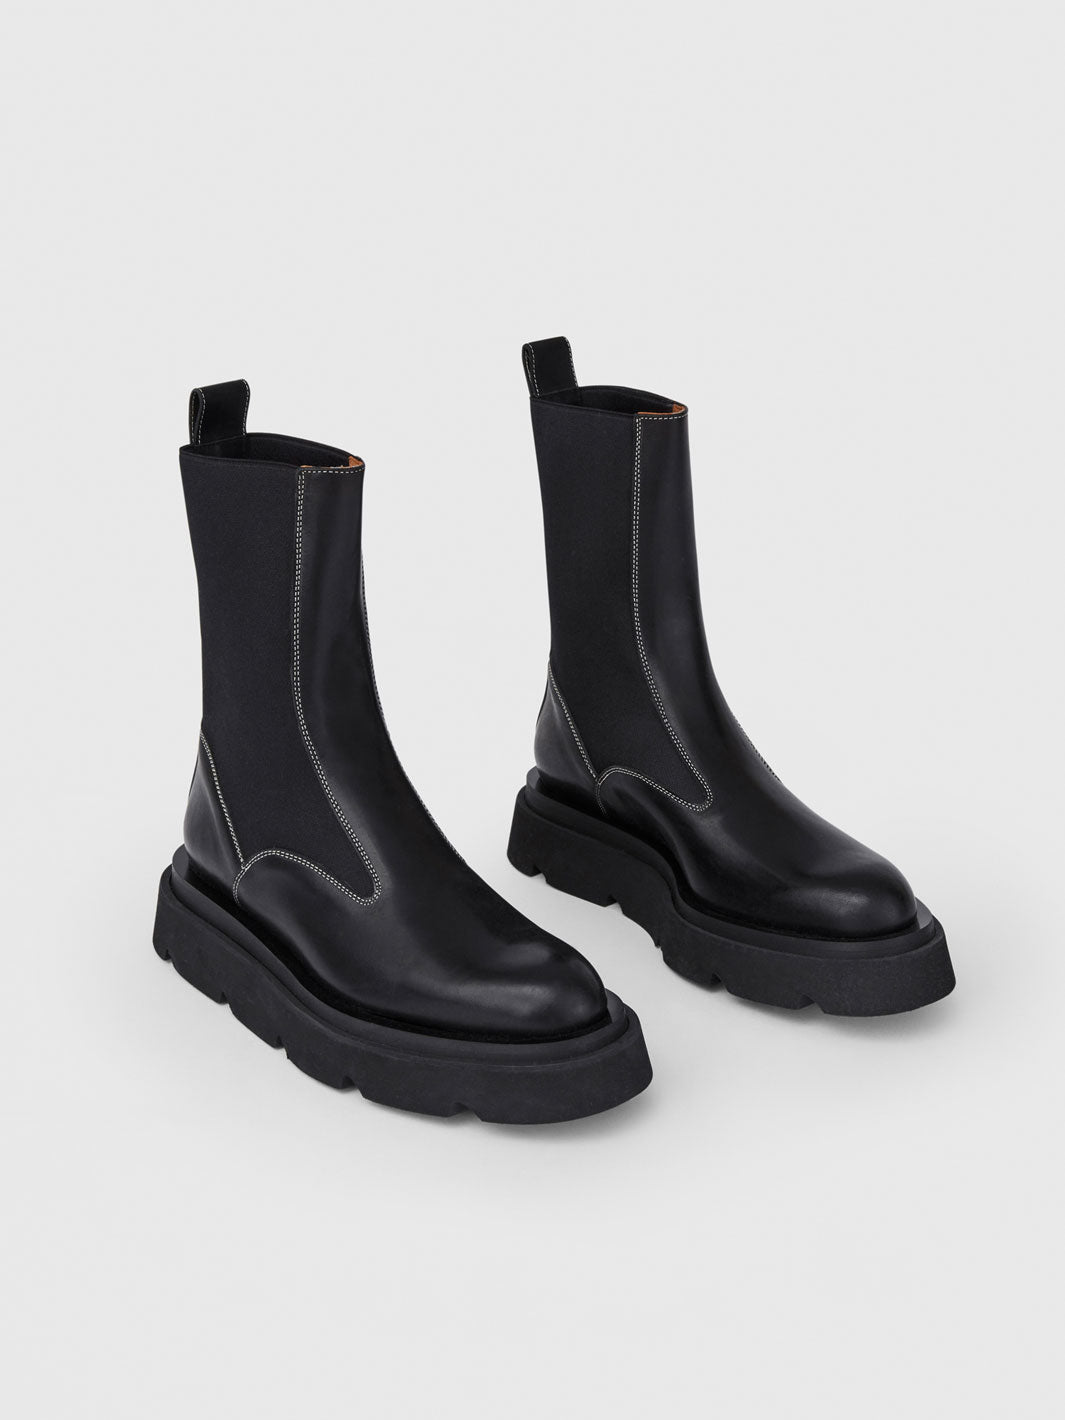 Moncalieri Black/Contrast Stitch Leather Chunky Boots